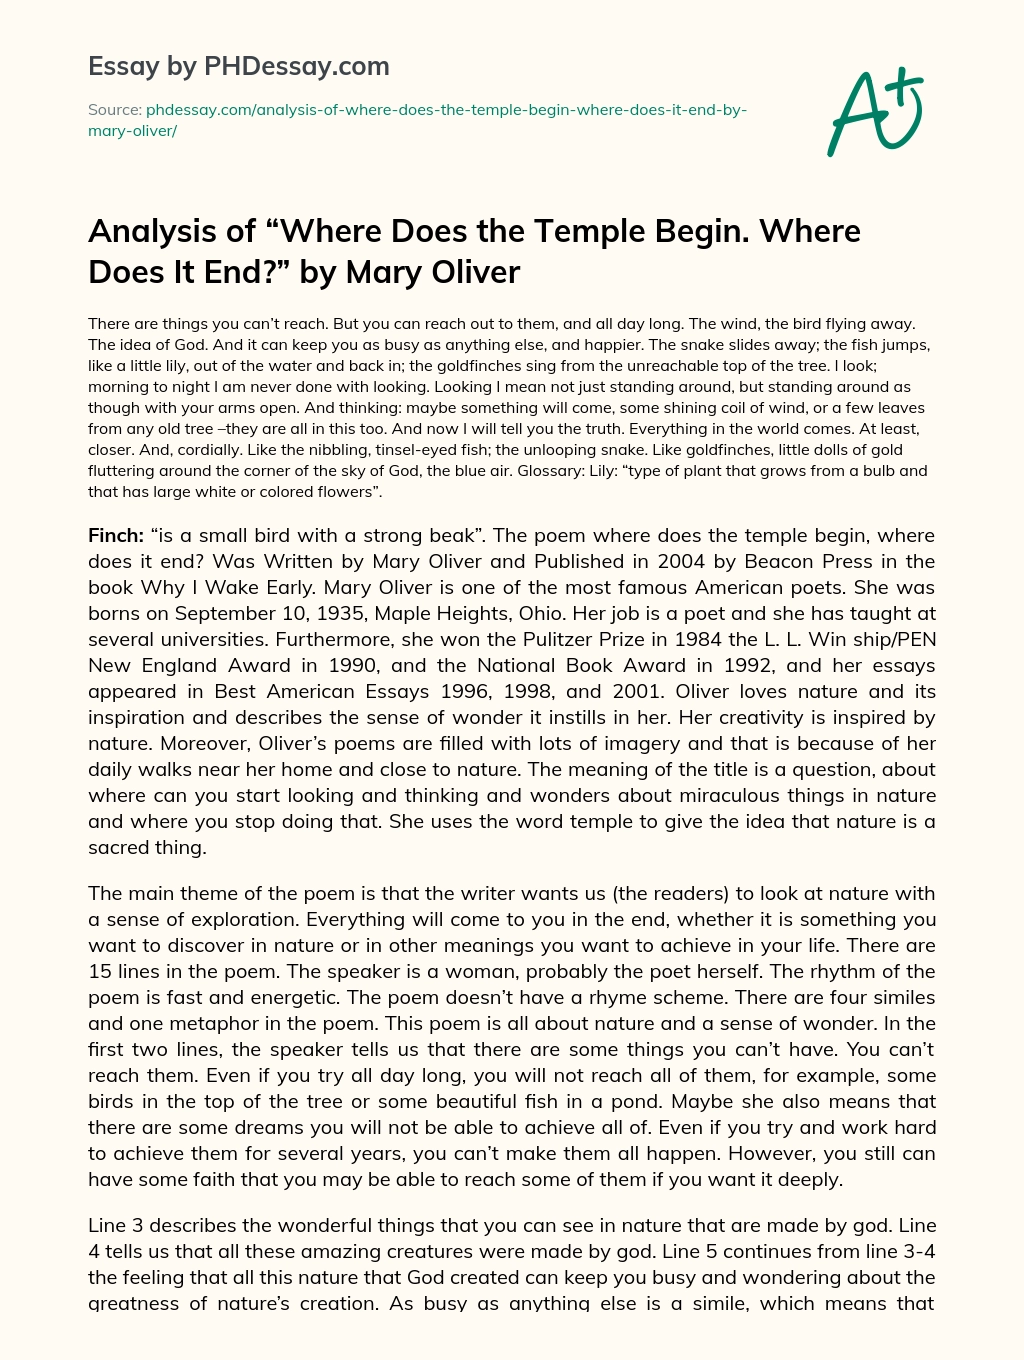 Analysis of “Where Does the Temple Begin. Where Does It End?” by Mary Oliver essay